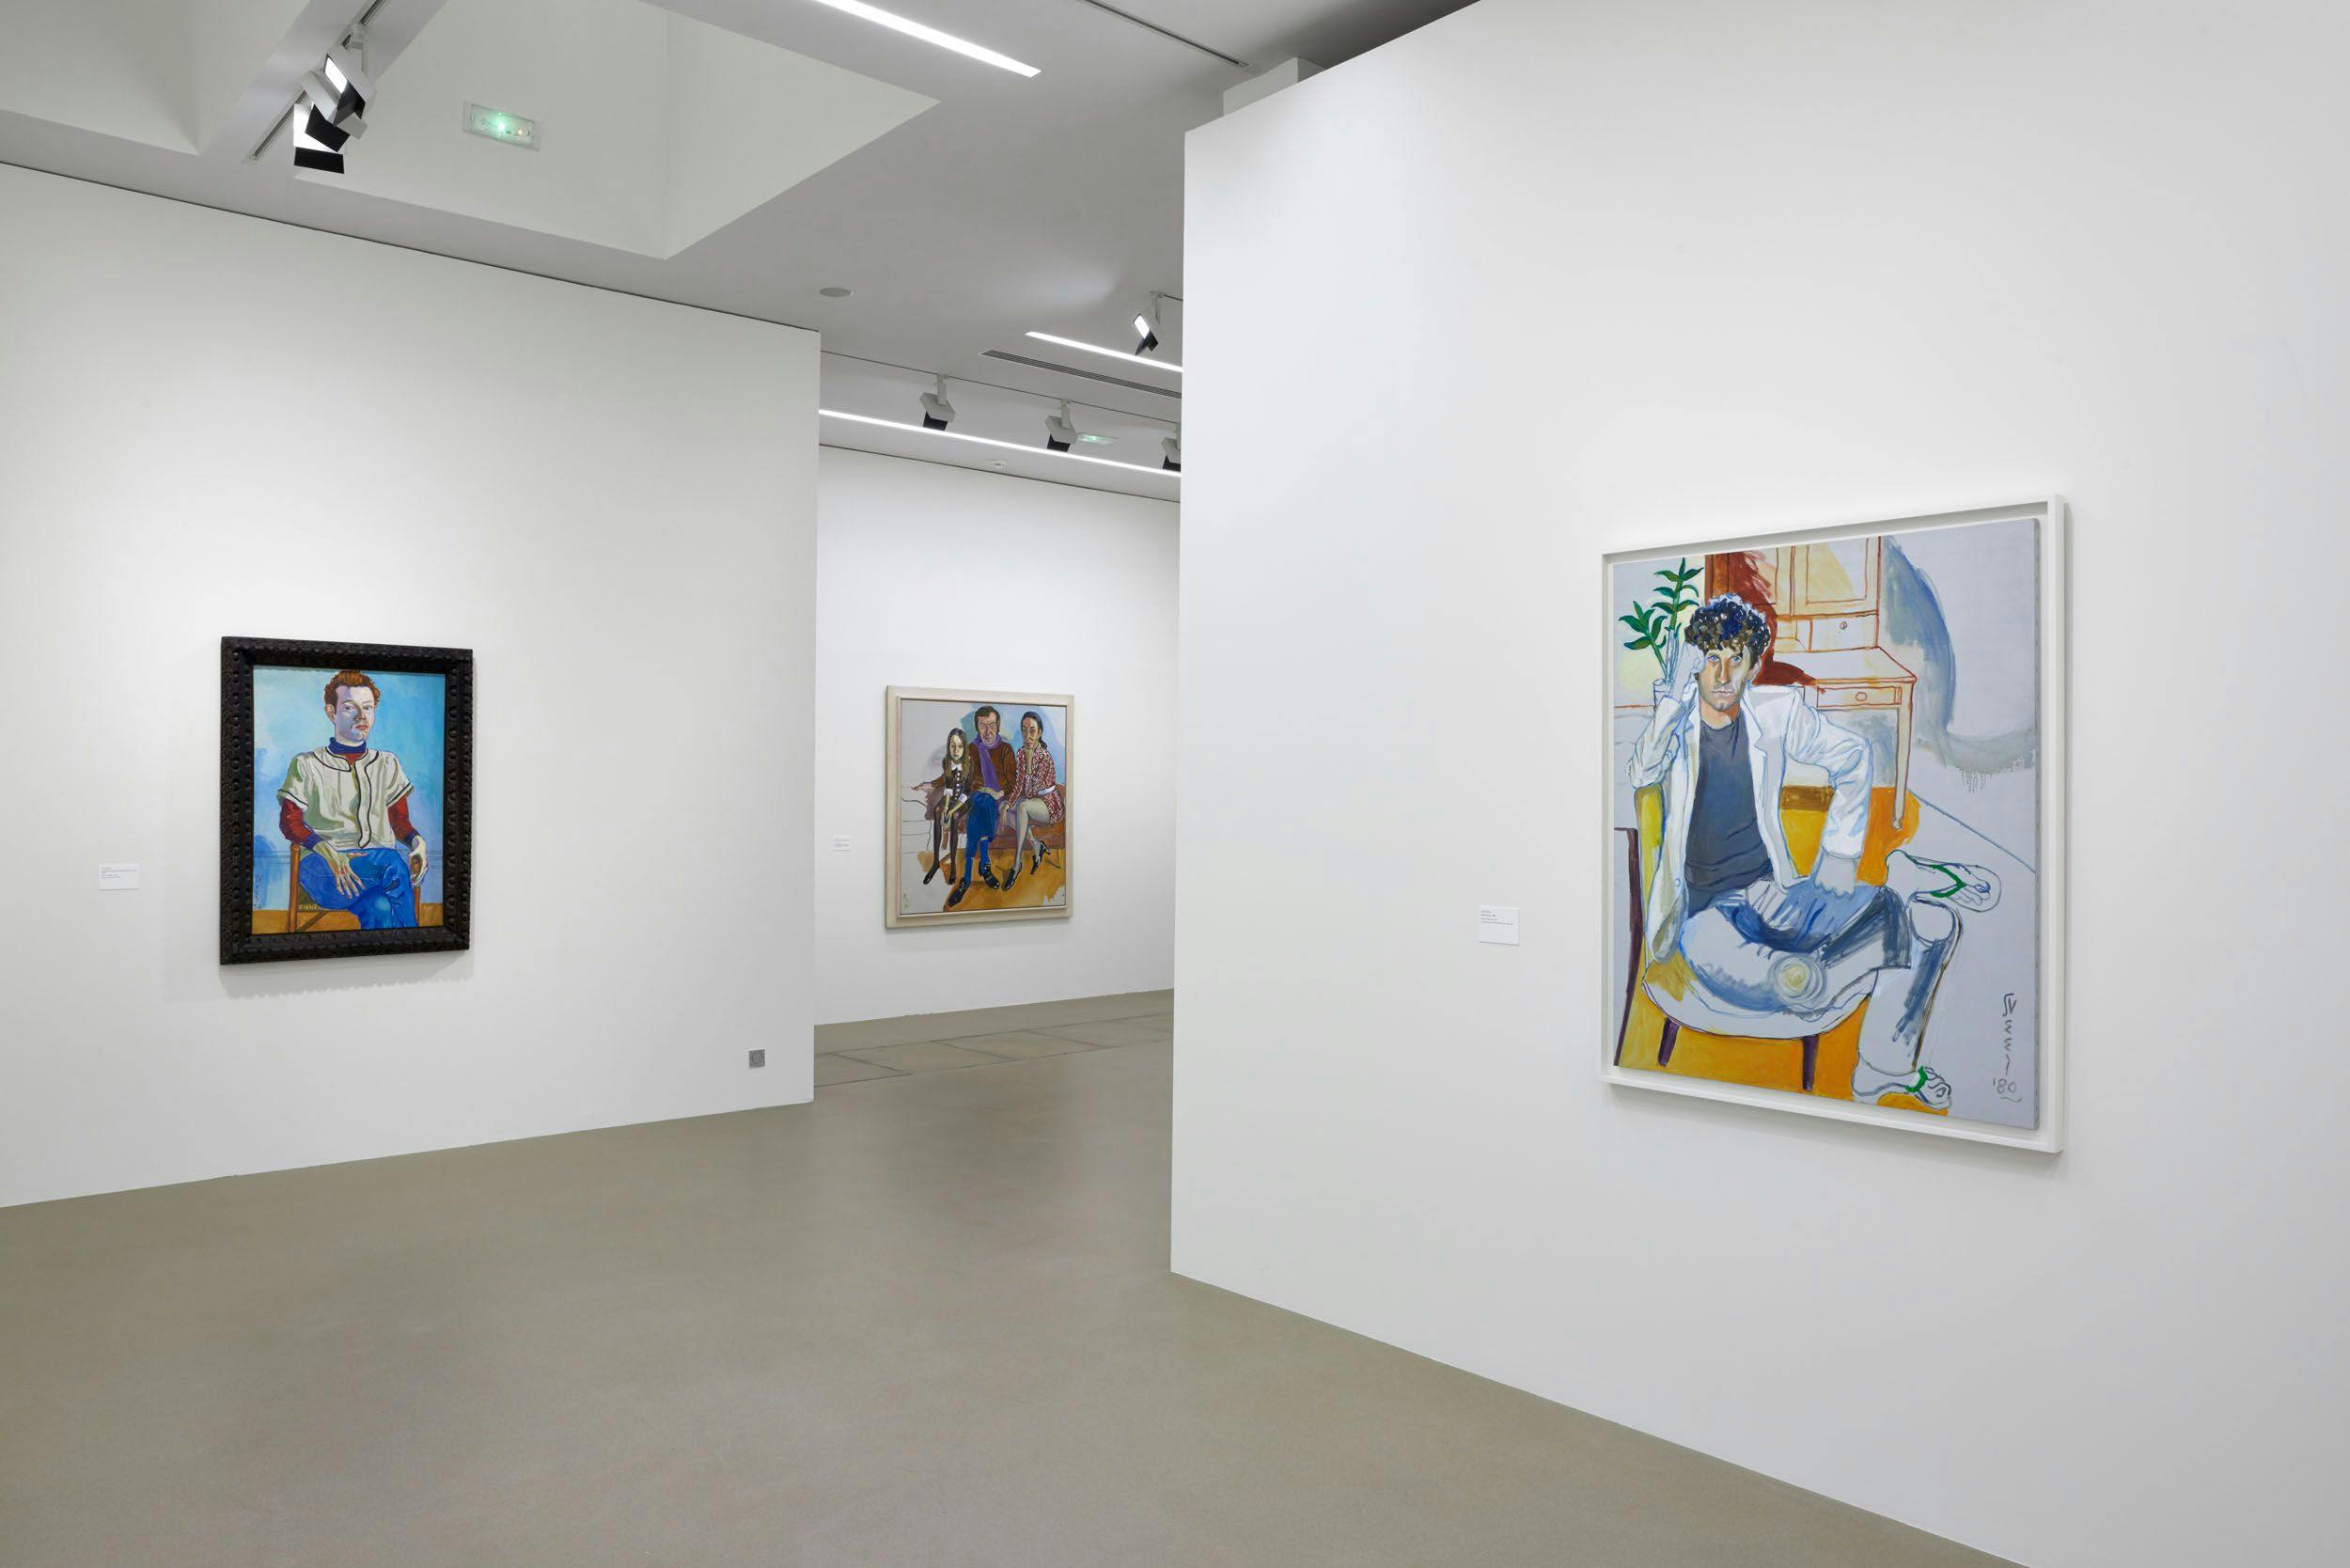 Installation view of¬†the exhibition Alice Neel: Painter of Modern Life,¬†at the¬†Fondation Vincent van Gogh in Arles, France, dated 2017.